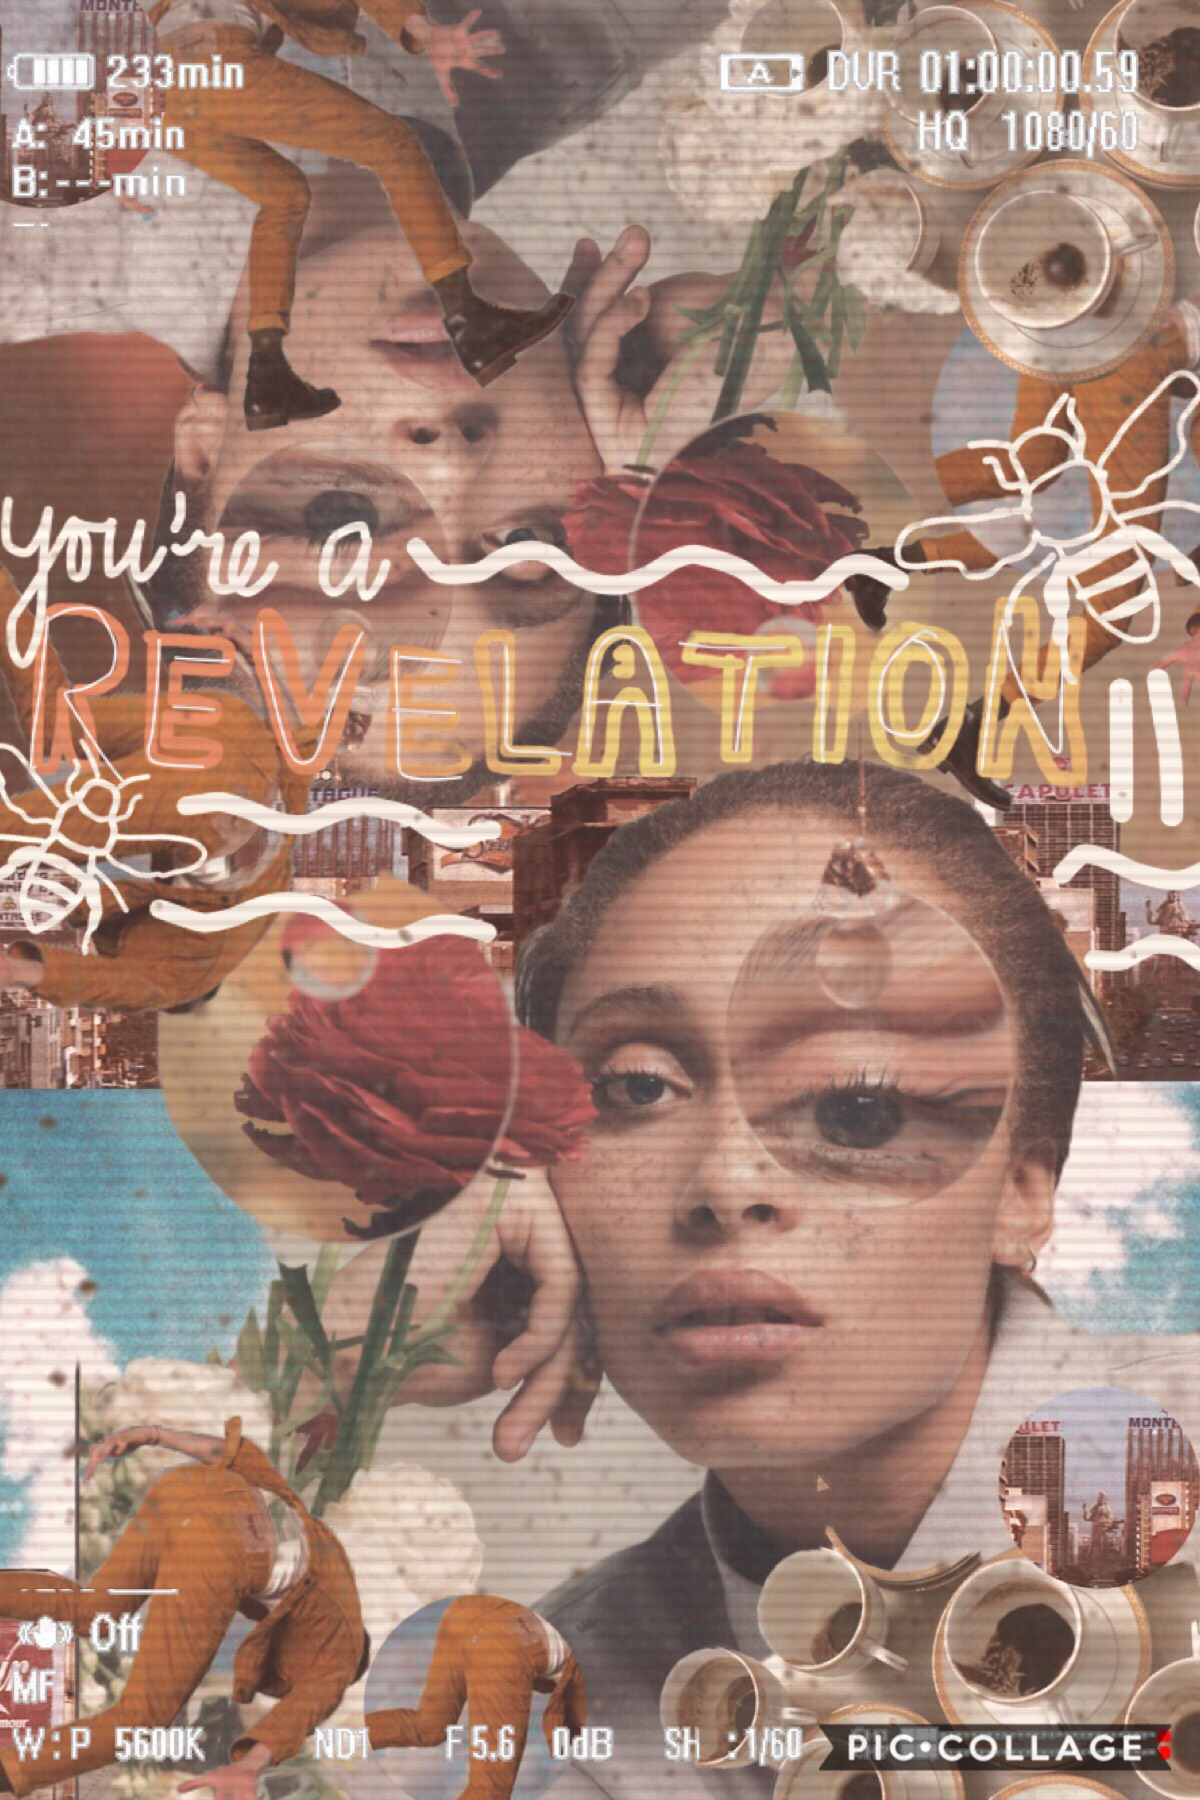 tap
i quite like revelation—you should go listen to it. it’s good.
anywaysSss how are you all
because im just swell.
and i have to finish my LOADS of homework. 
QOTD: what’s your homework today lol
AOTD: an essay and annotate a packet